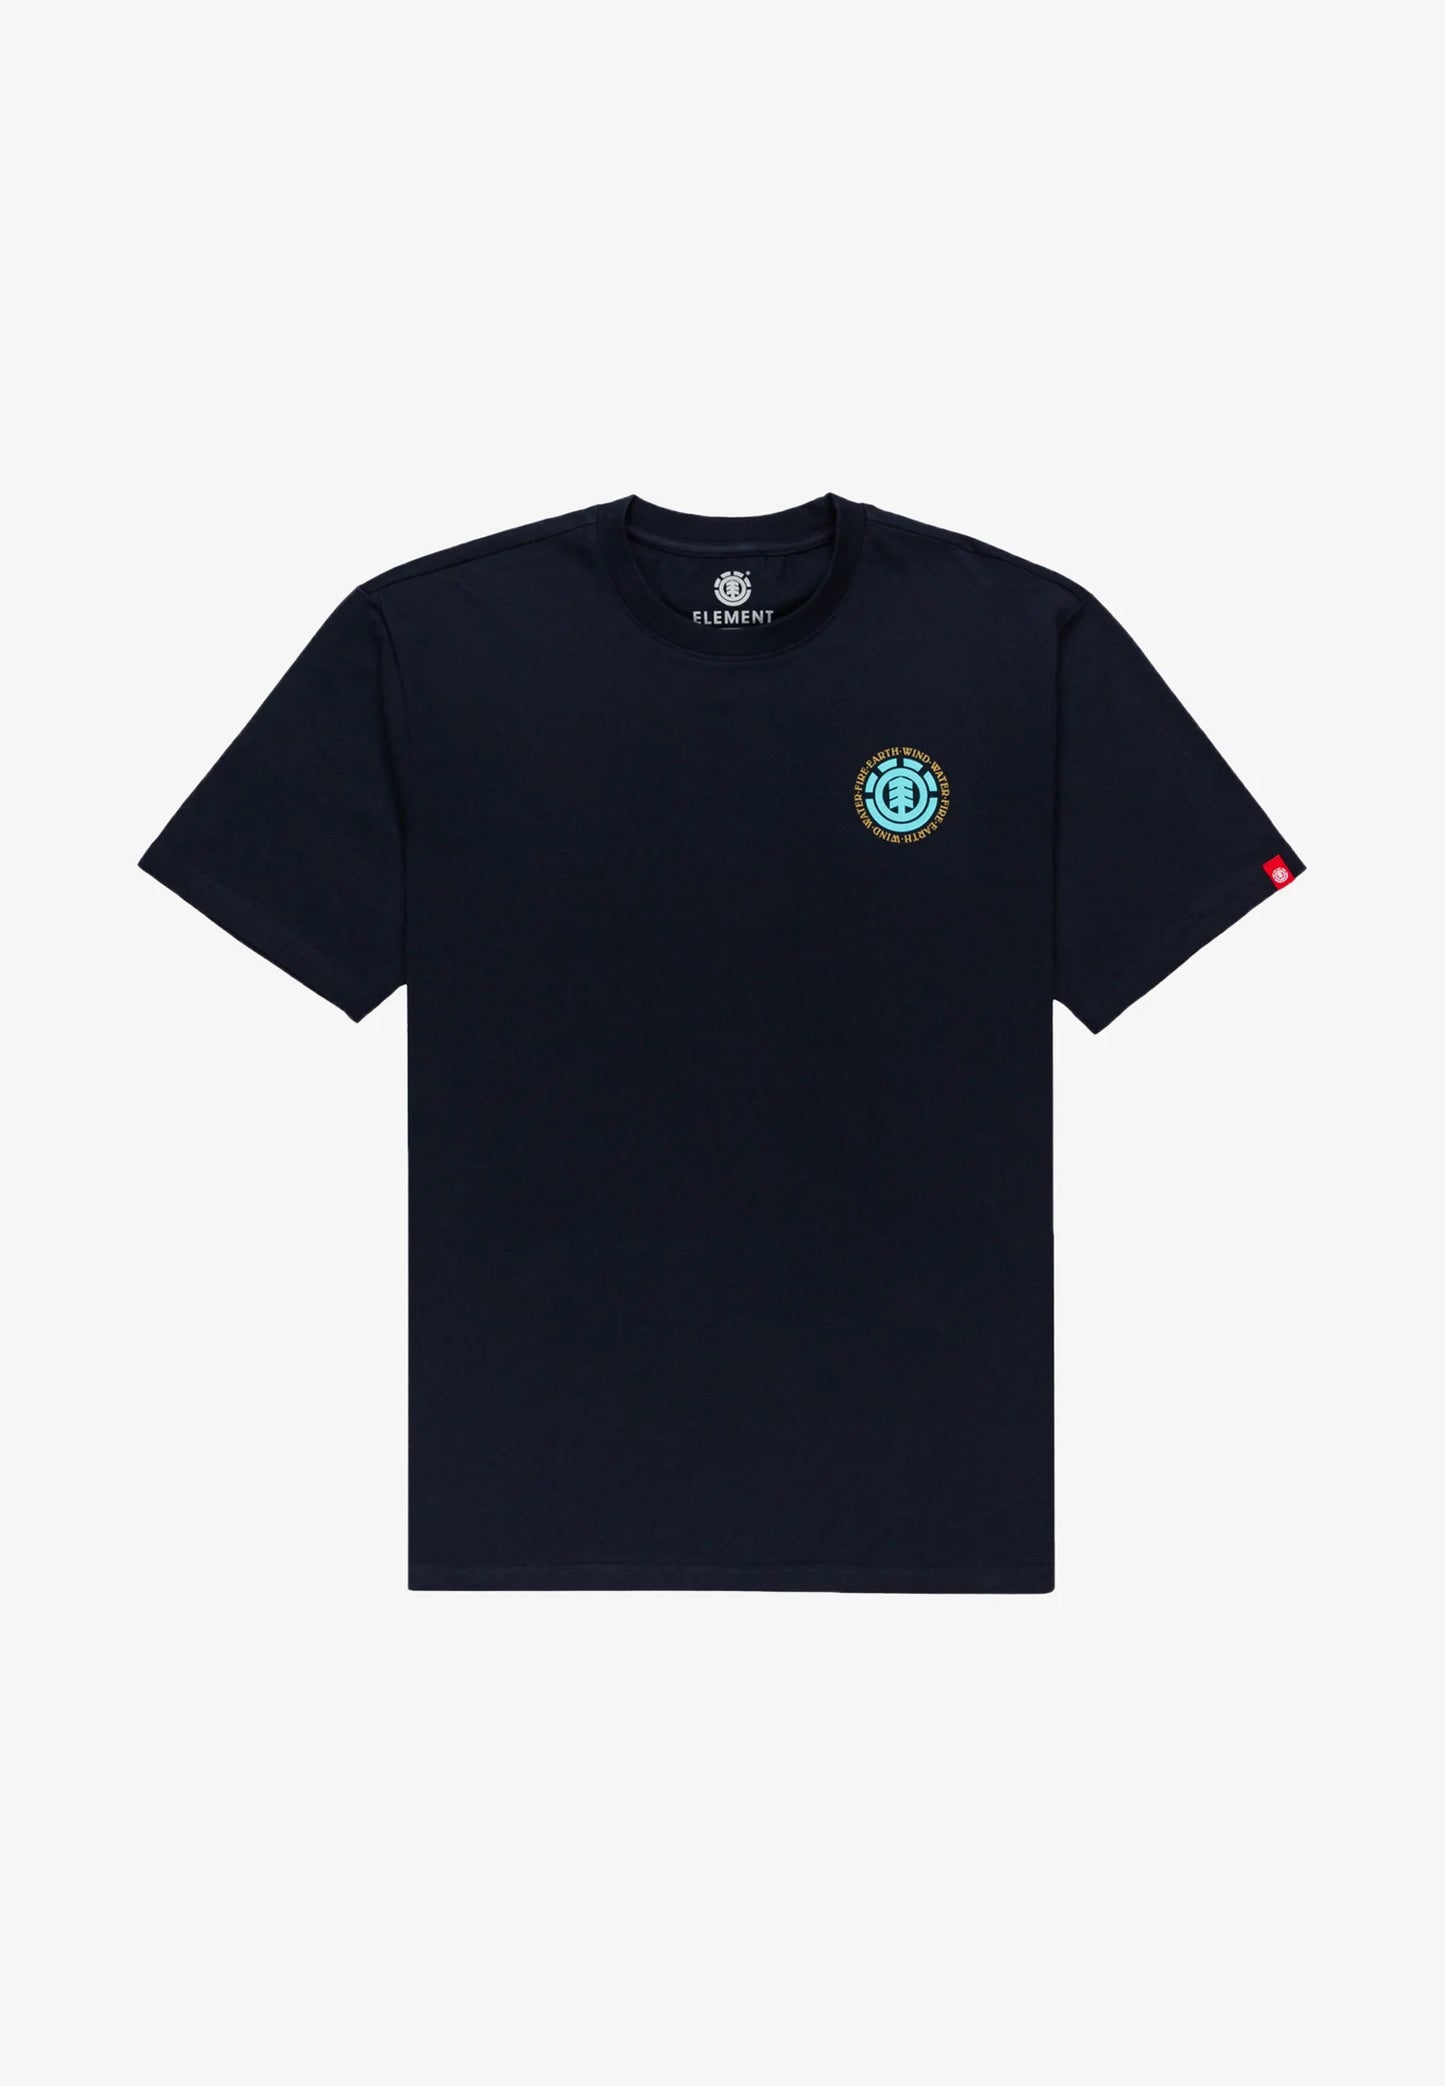 ELEMENT - SEAL BP SS YOUTH TEE - ECLIPSE NAVY